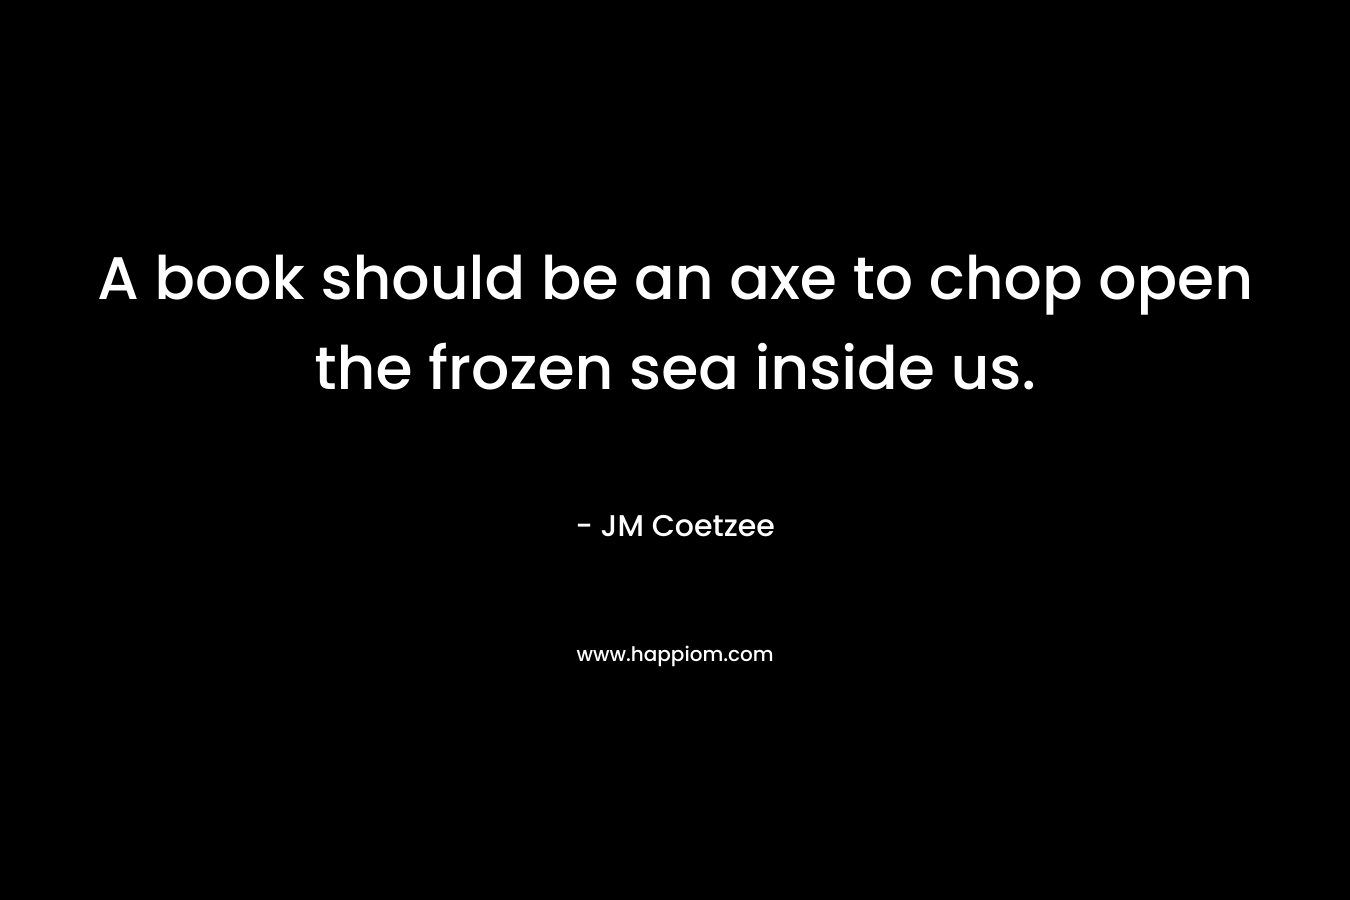 A book should be an axe to chop open the frozen sea inside us.